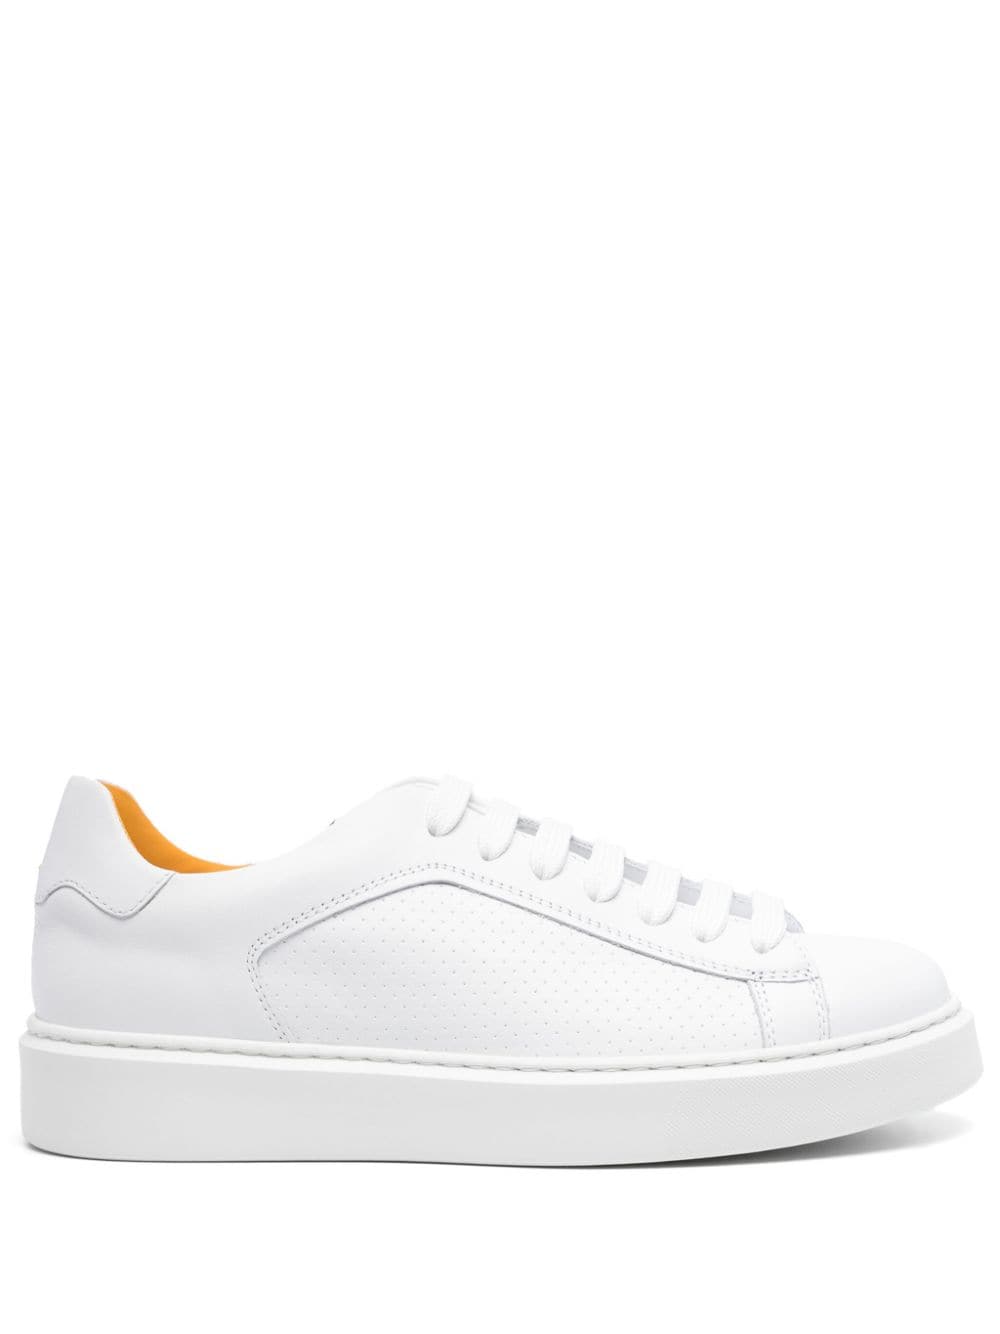 Doucal's perforated leather sneakers - White von Doucal's